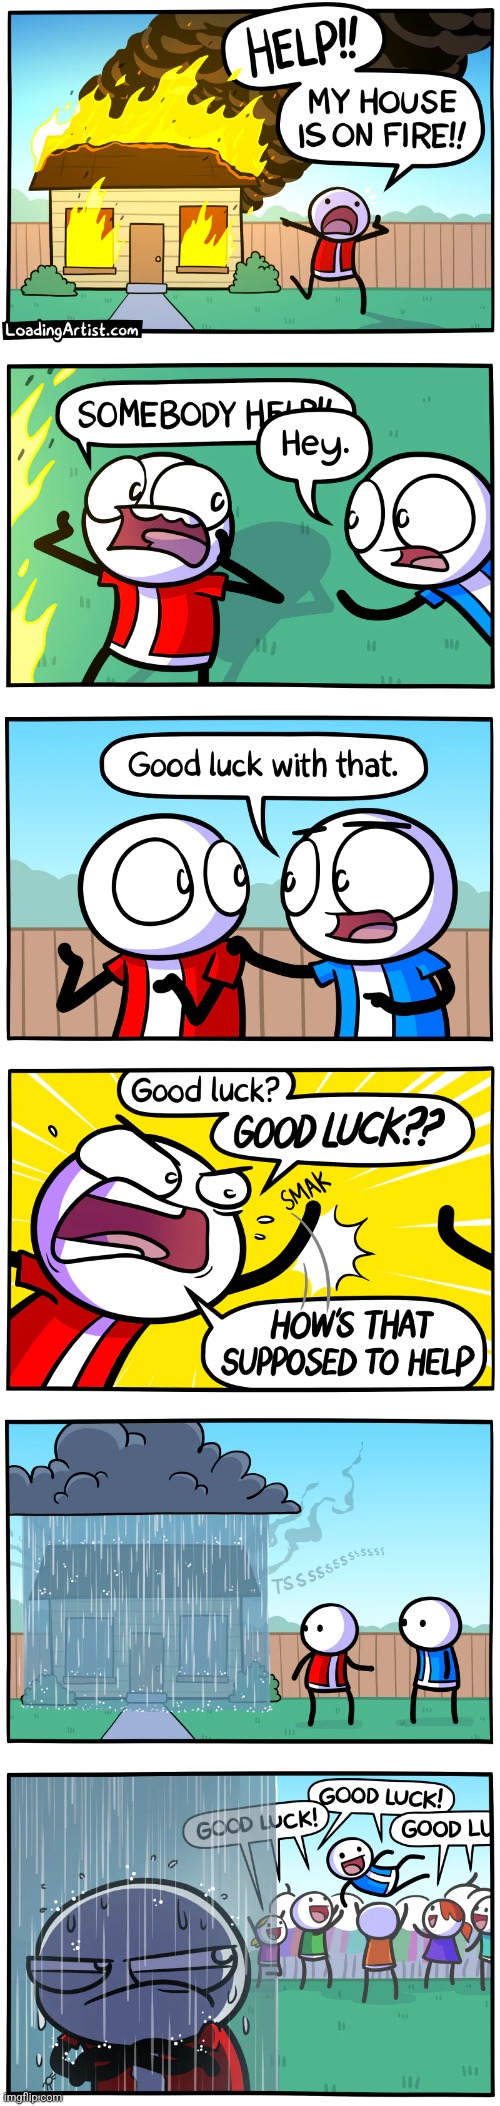 Lucky | image tagged in lucky,good luck,comics,loading artist,fire | made w/ Imgflip meme maker